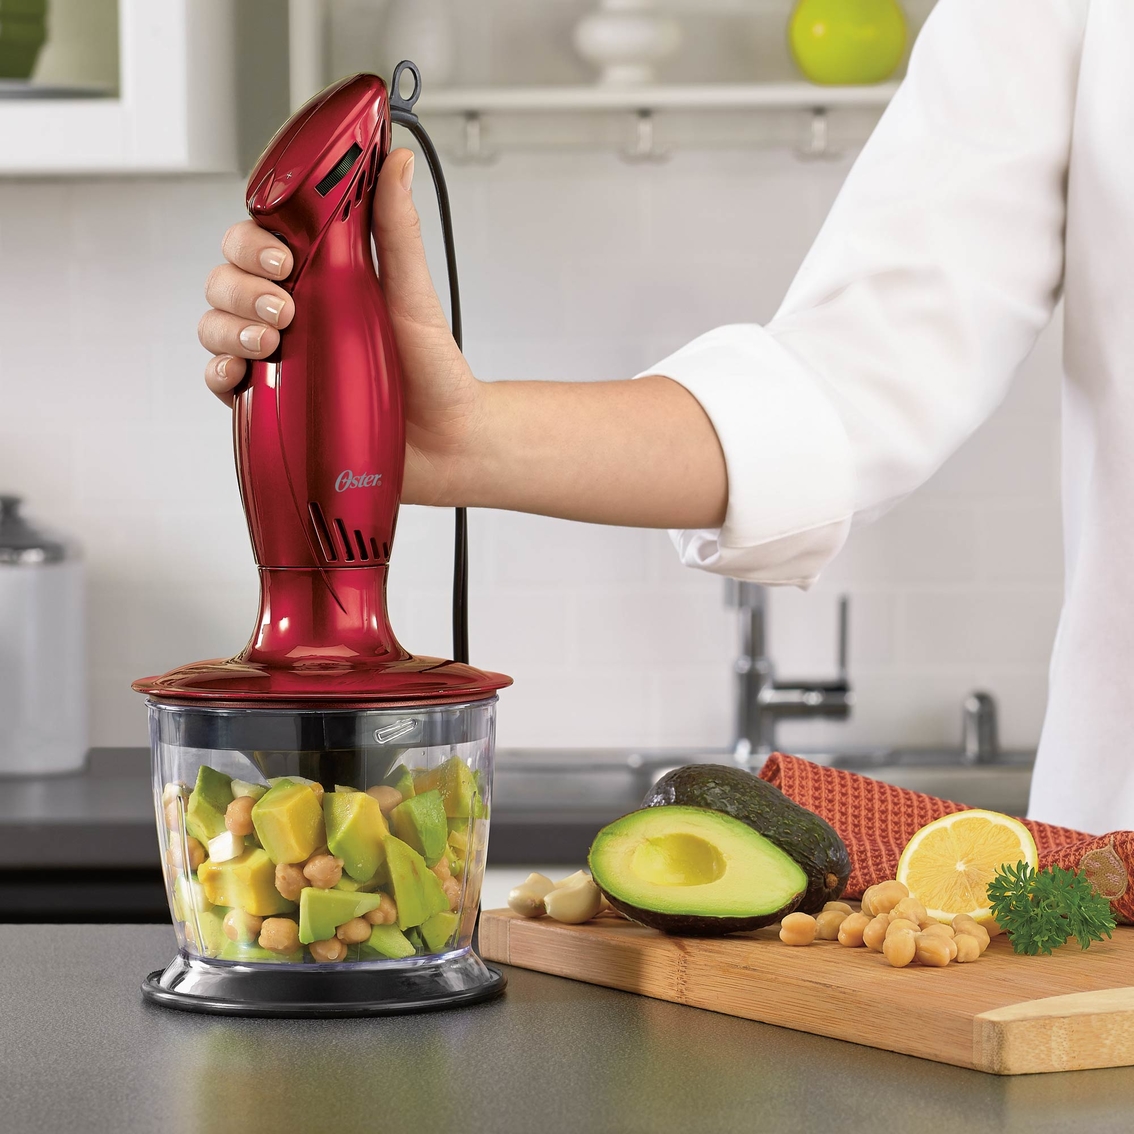 Oster 2-speed Immersion Hand Blender With Food Chopper Attachment